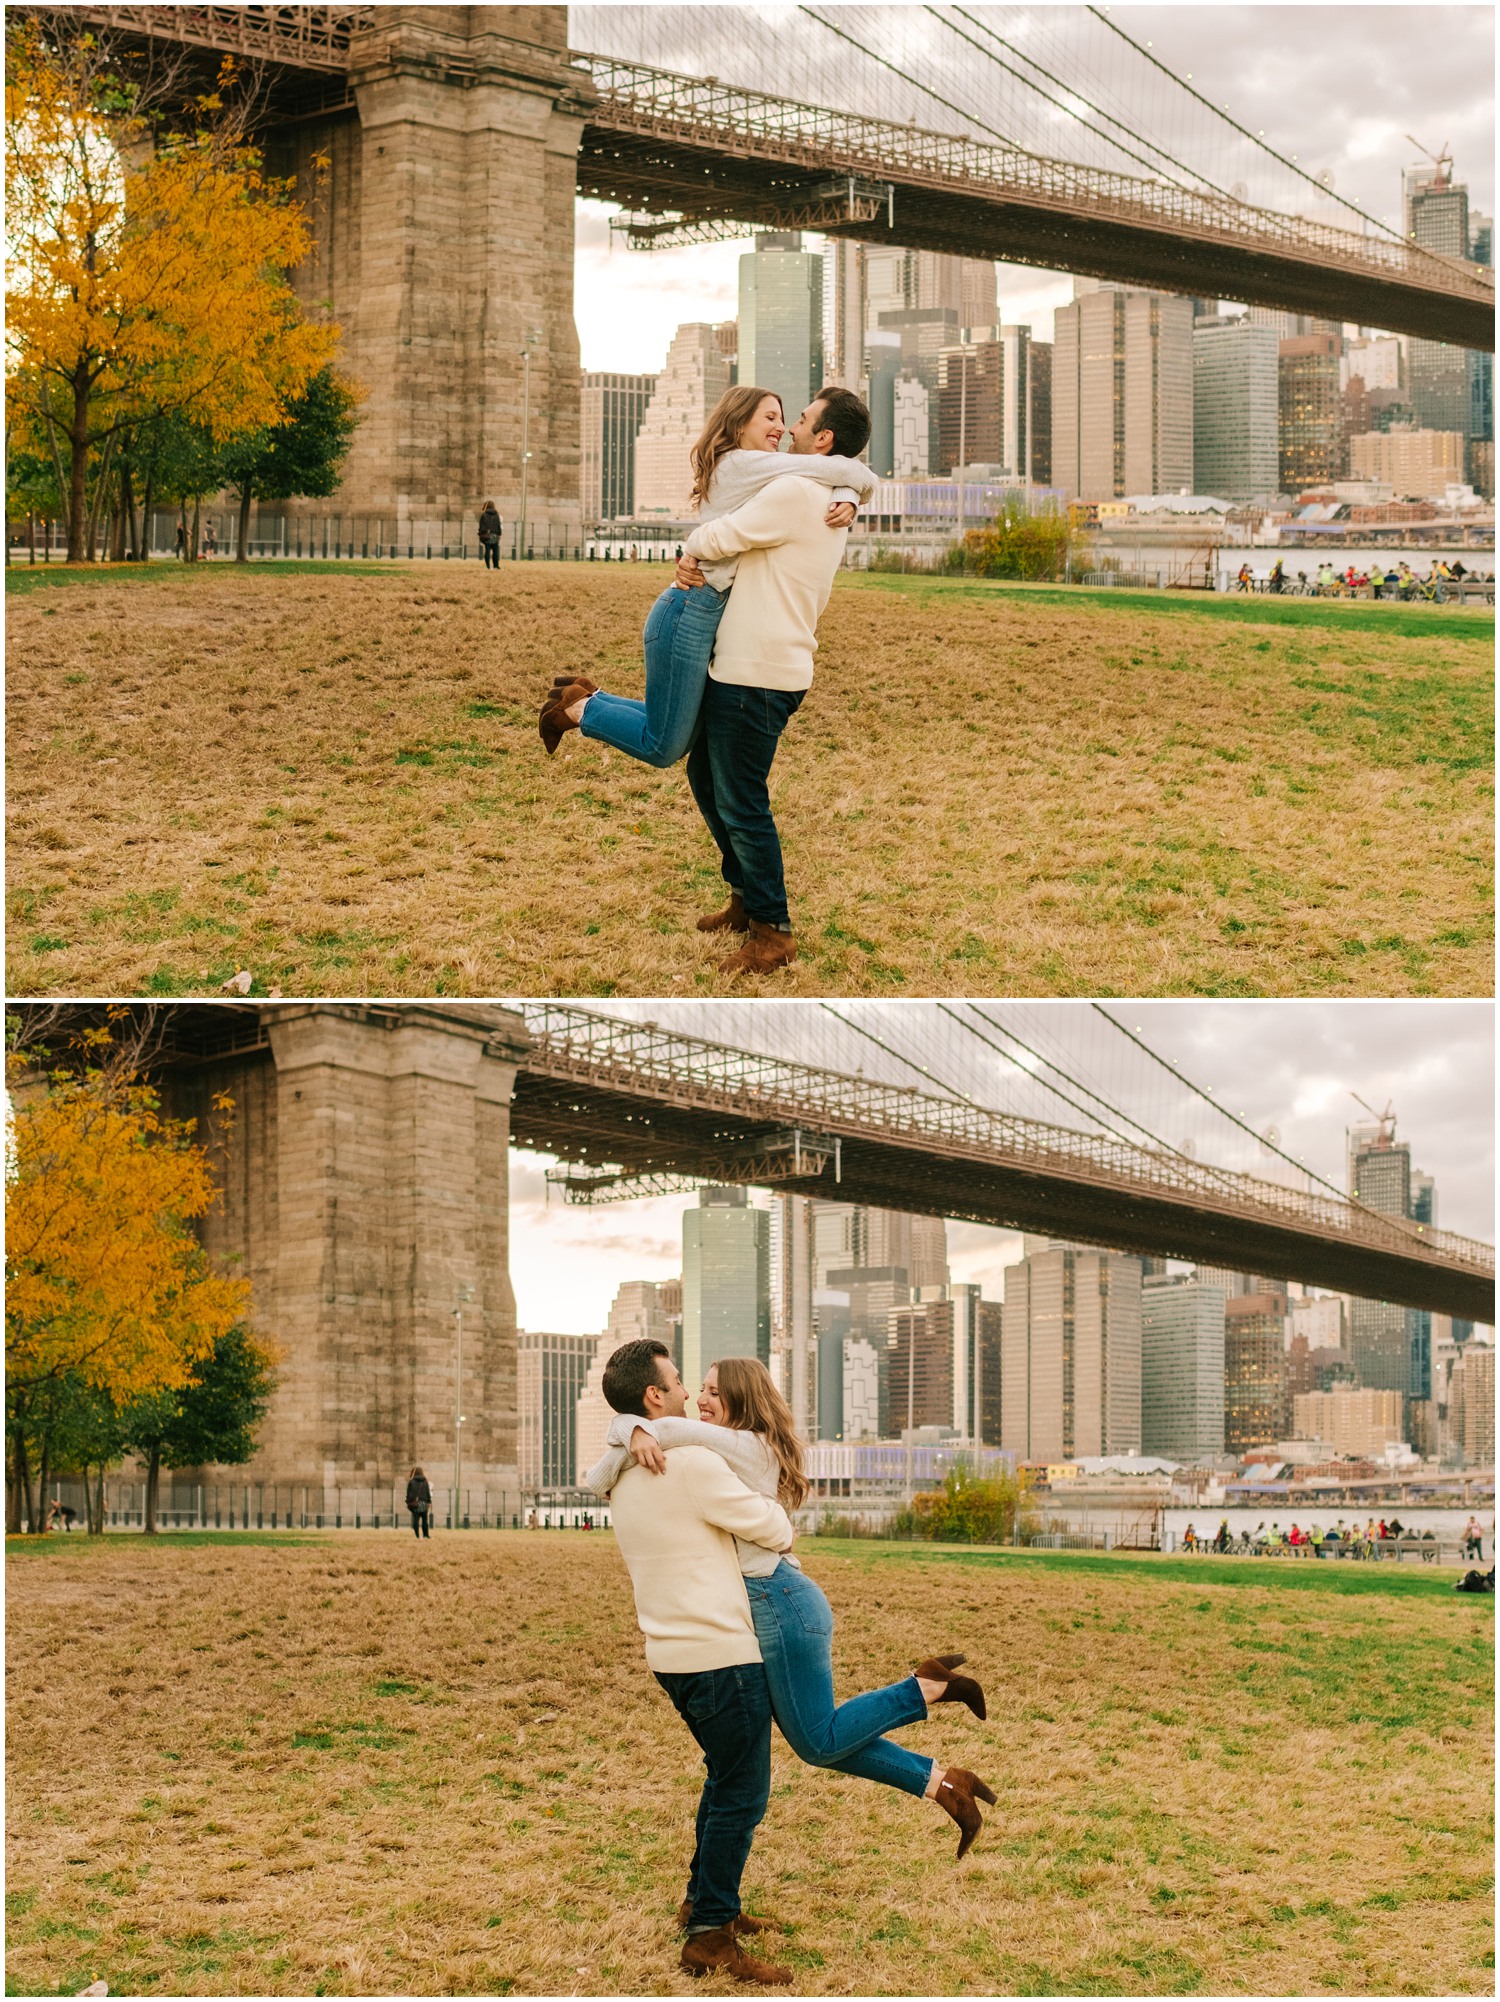 casual New York City engagement session by Brooklyn Bridge